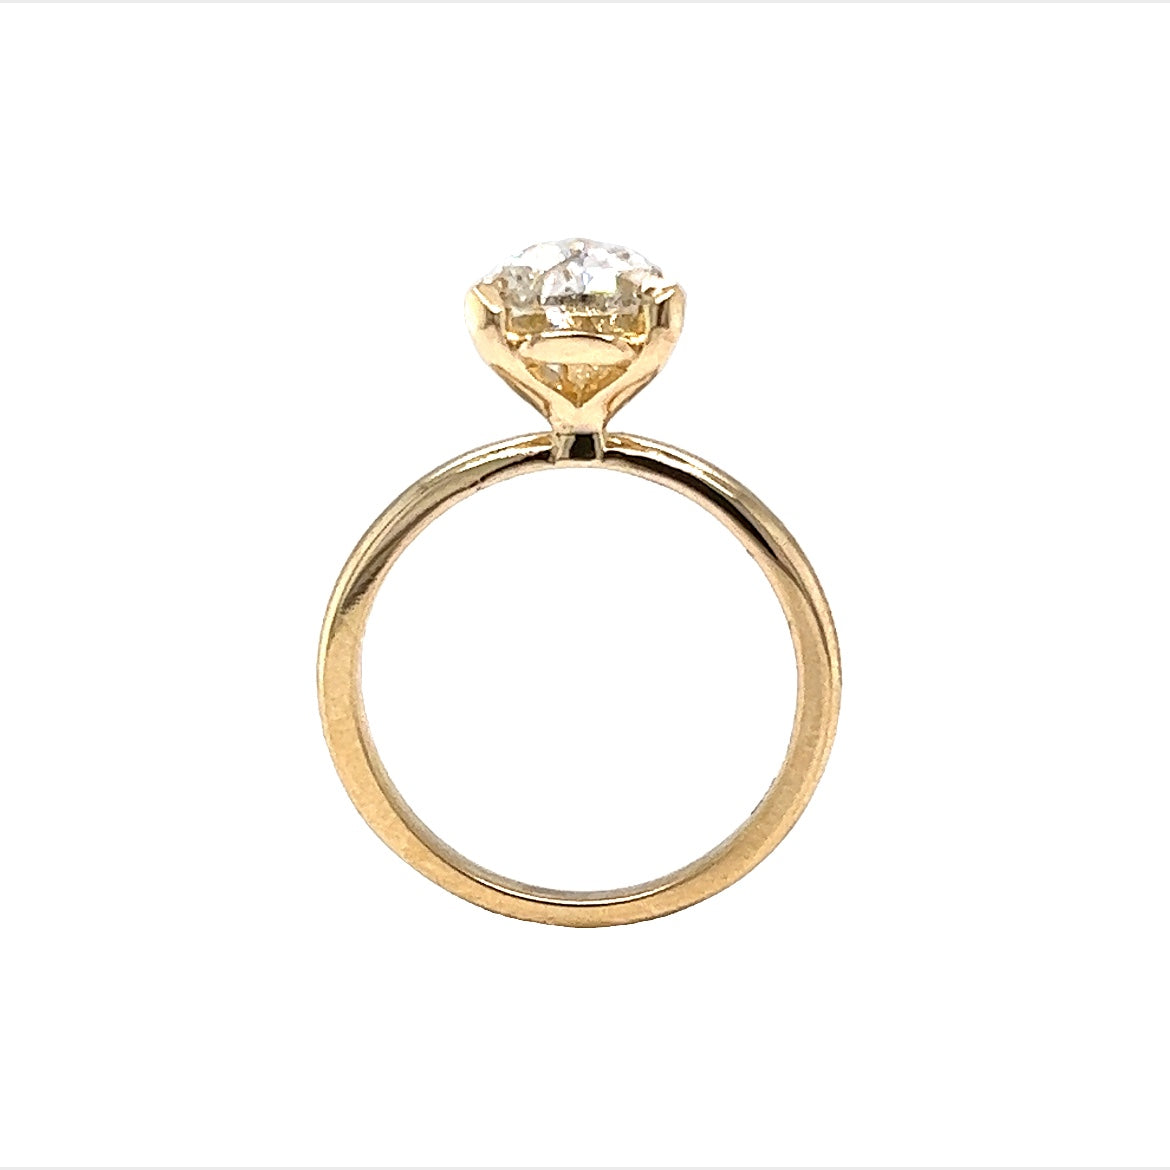 1.72 Solitaire Rose Pear Cut Diamond Engagement Ring in 14k Gold